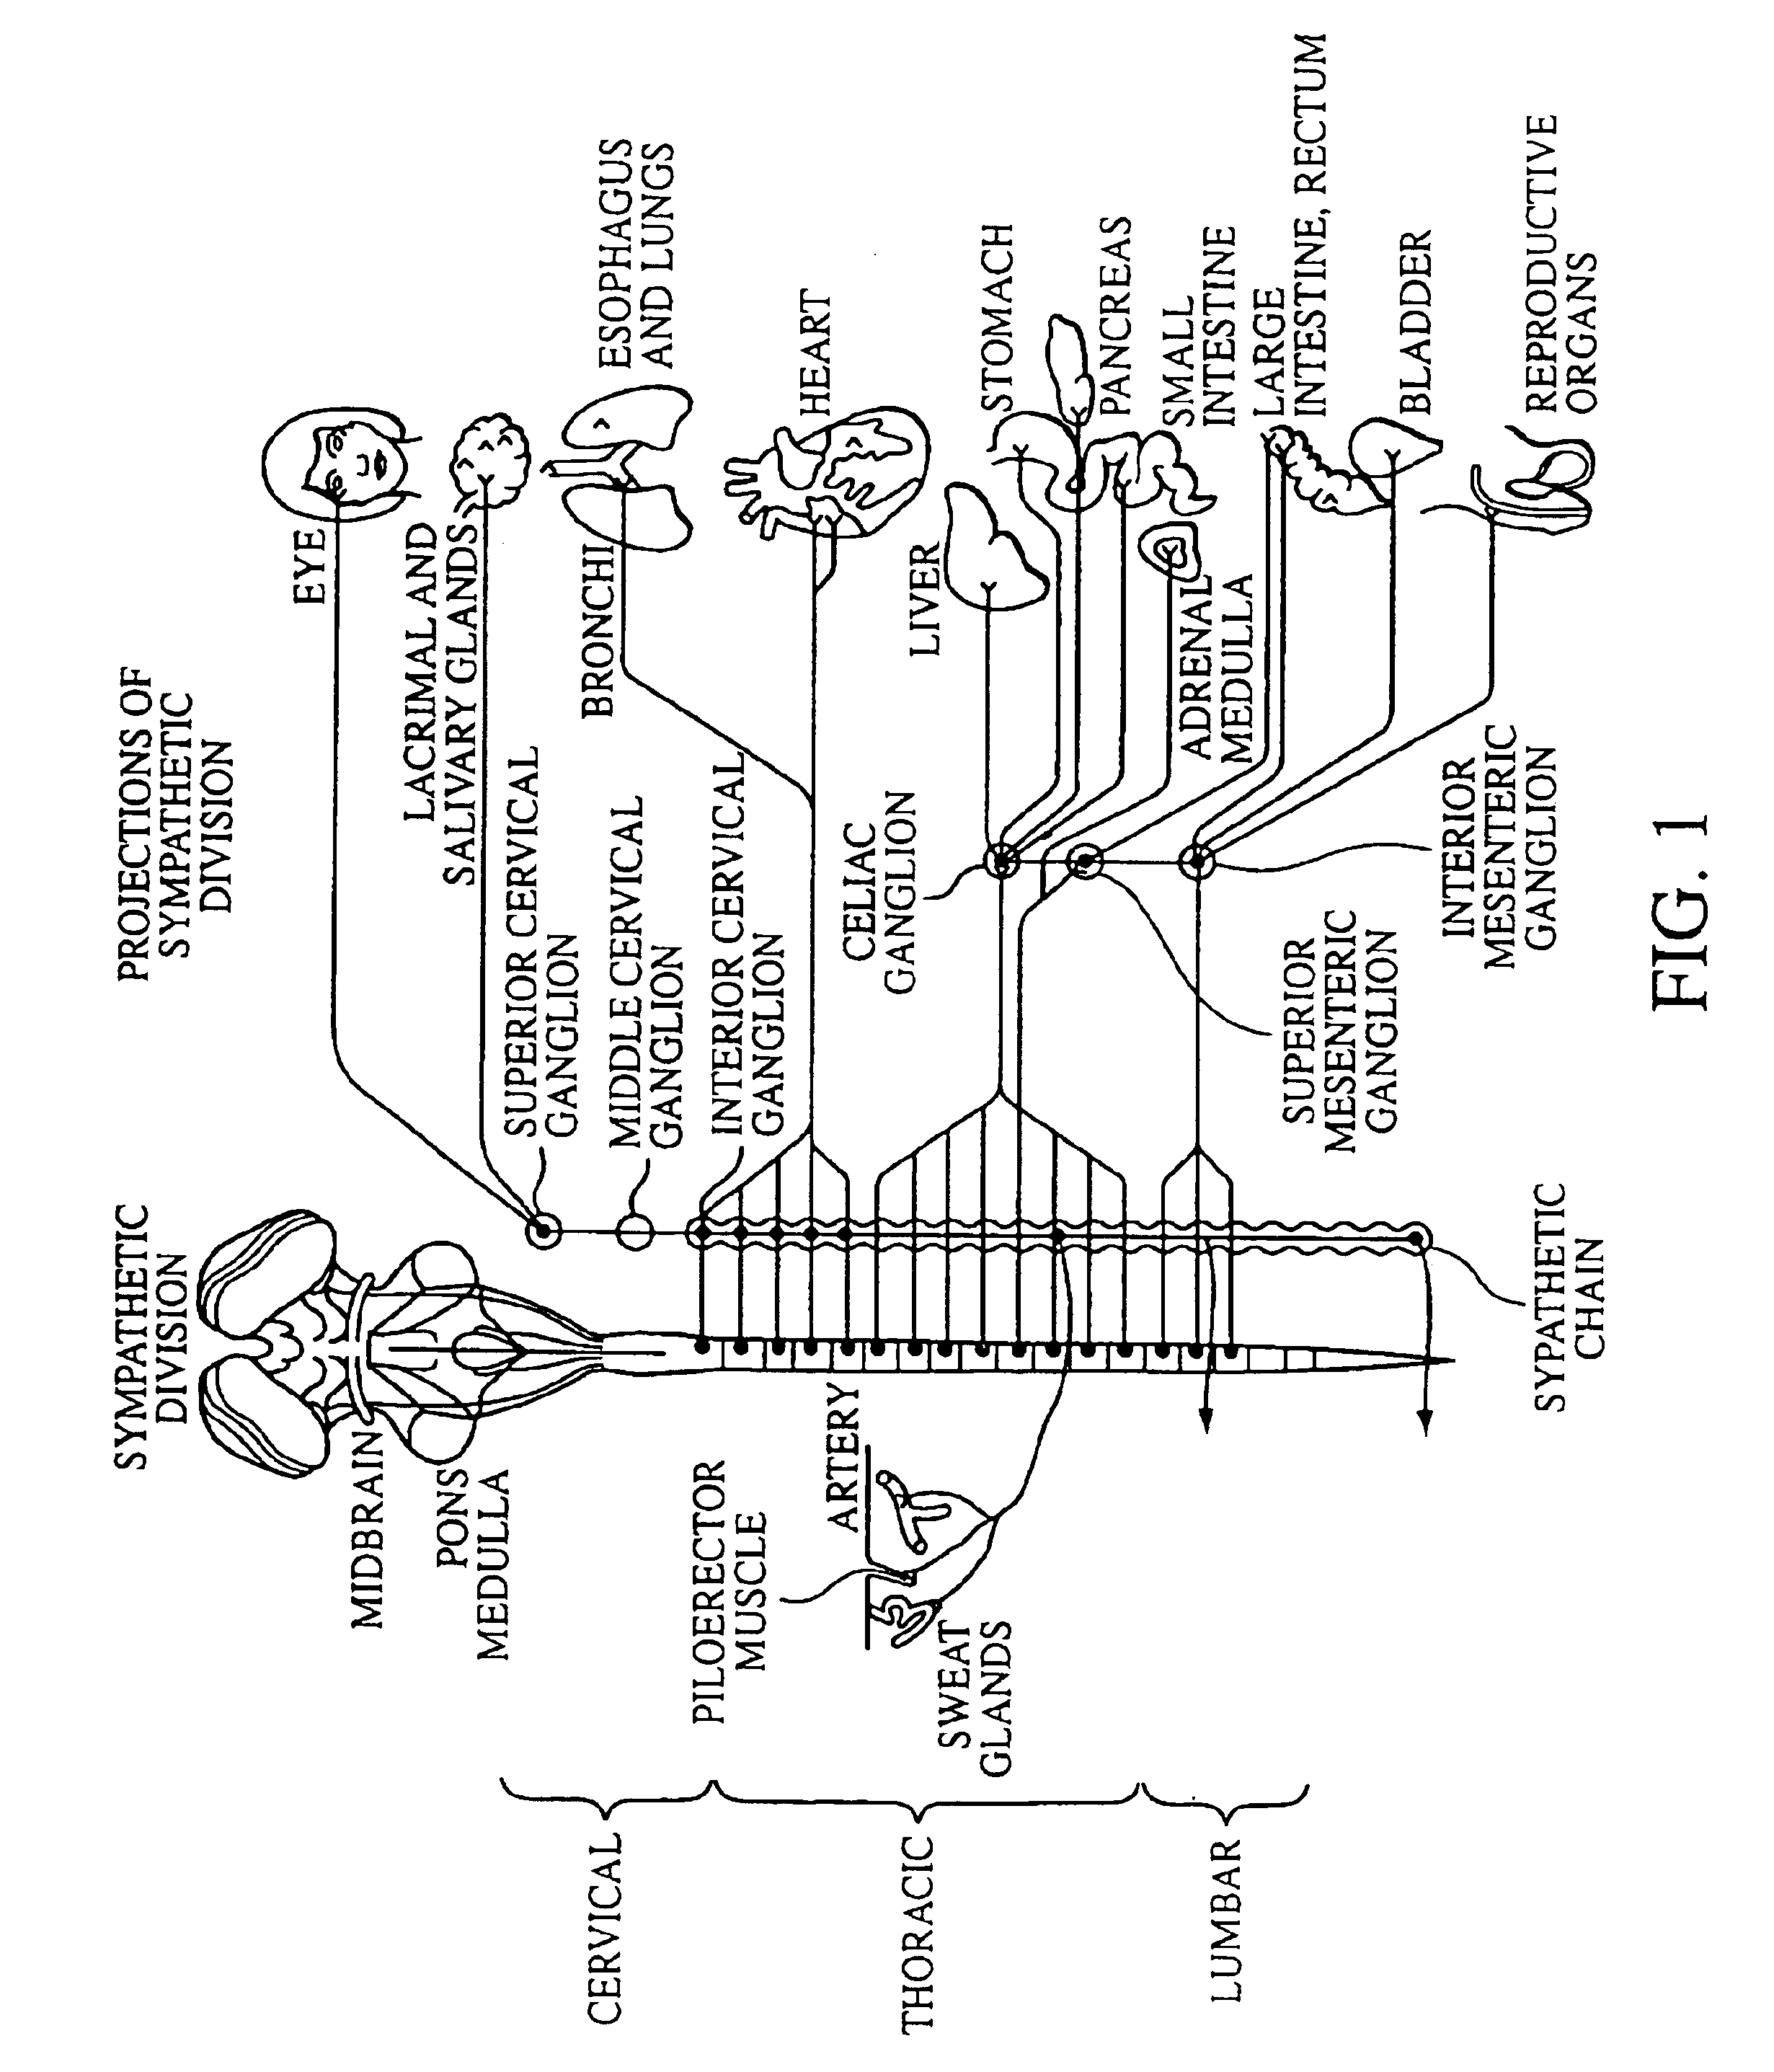 Electrical stimulation of the sympathetic nerve chain